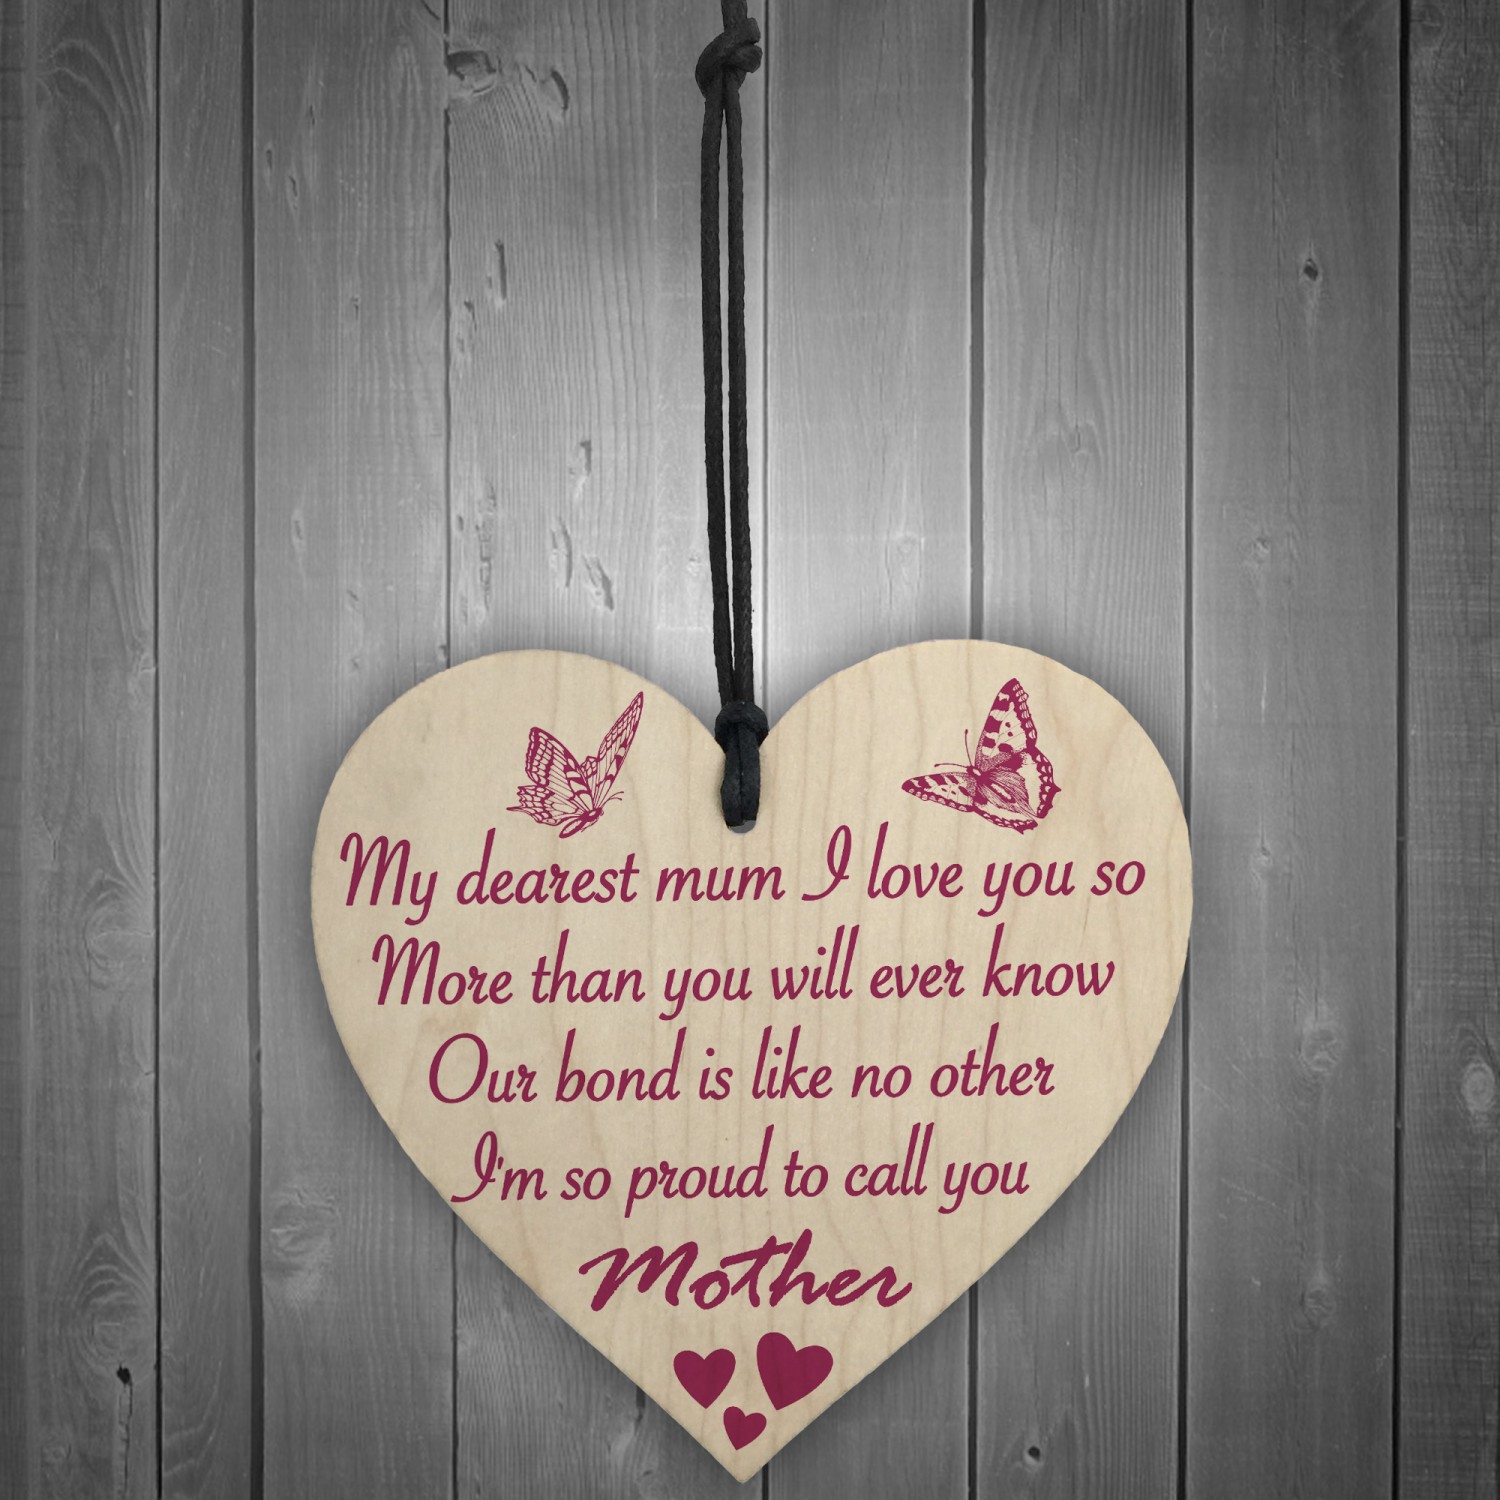 Details about   Wooden Hanging Proud Of My Mum Heart Sign Plaque Mum Love Gift UK 